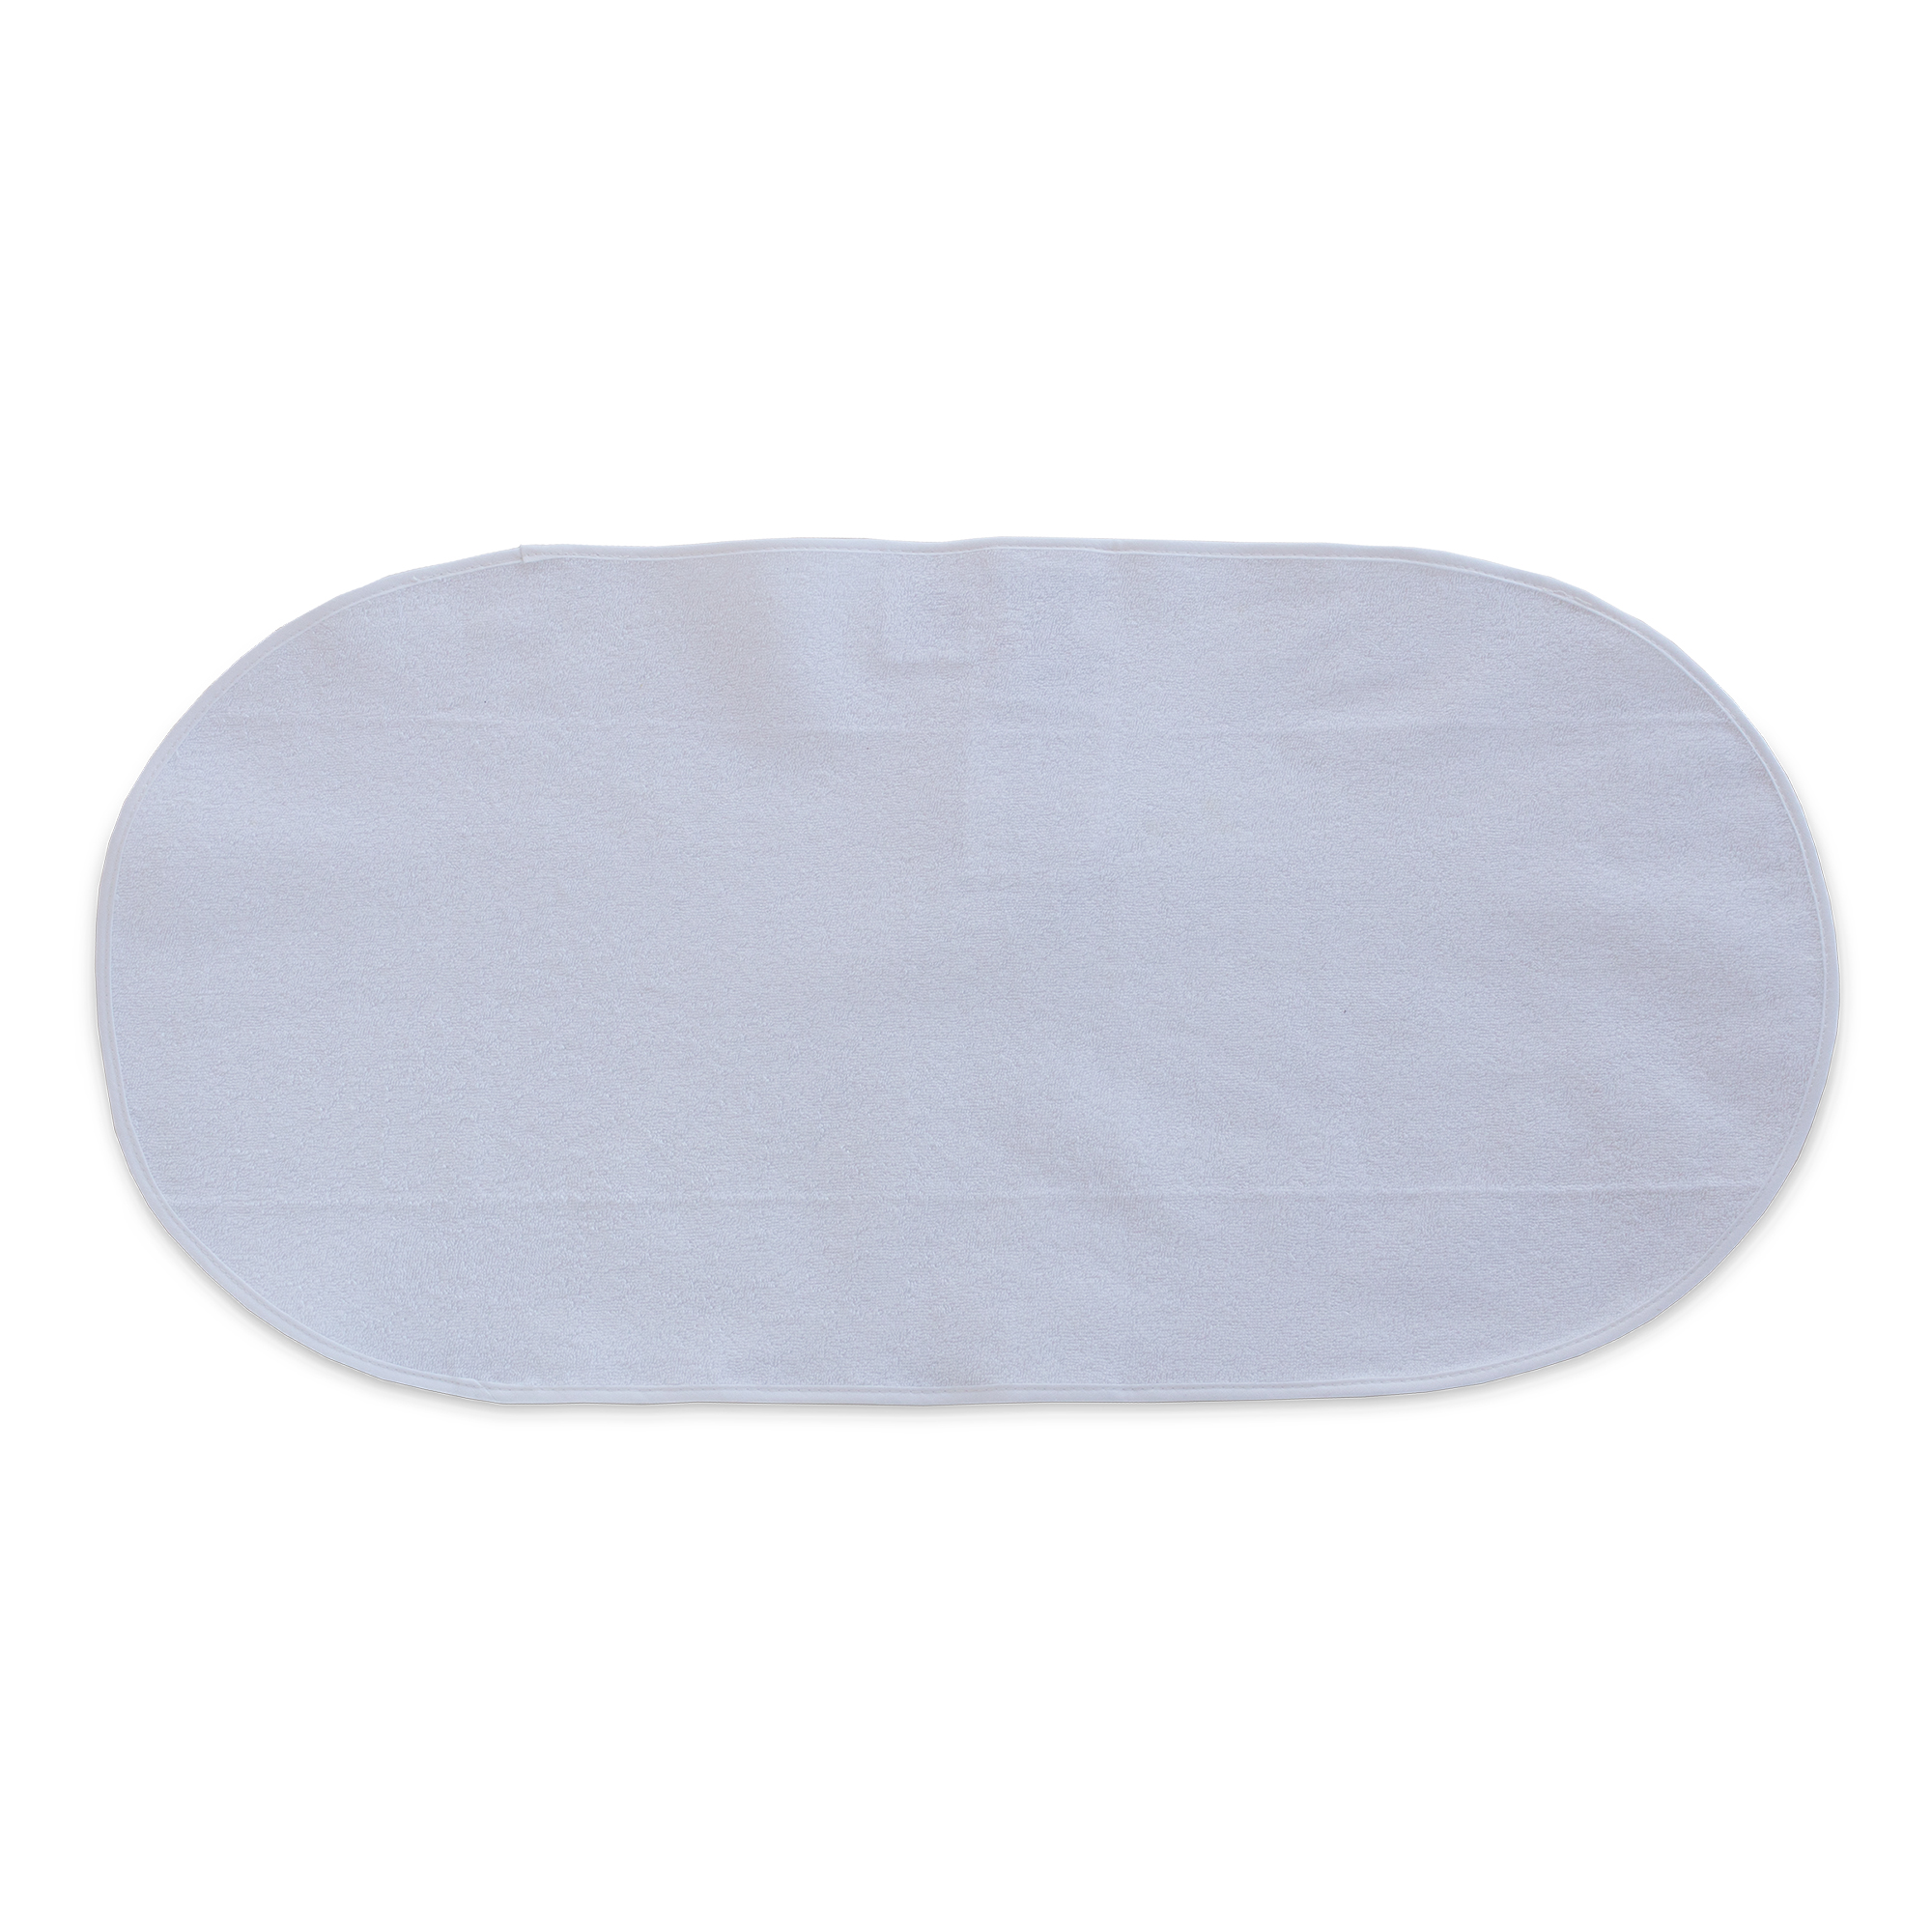 Boppy Changing Pad Liners, Pack of 3, White, Waterproof Backing, Easier Diaper Changes, Machine Washable - image 5 of 8